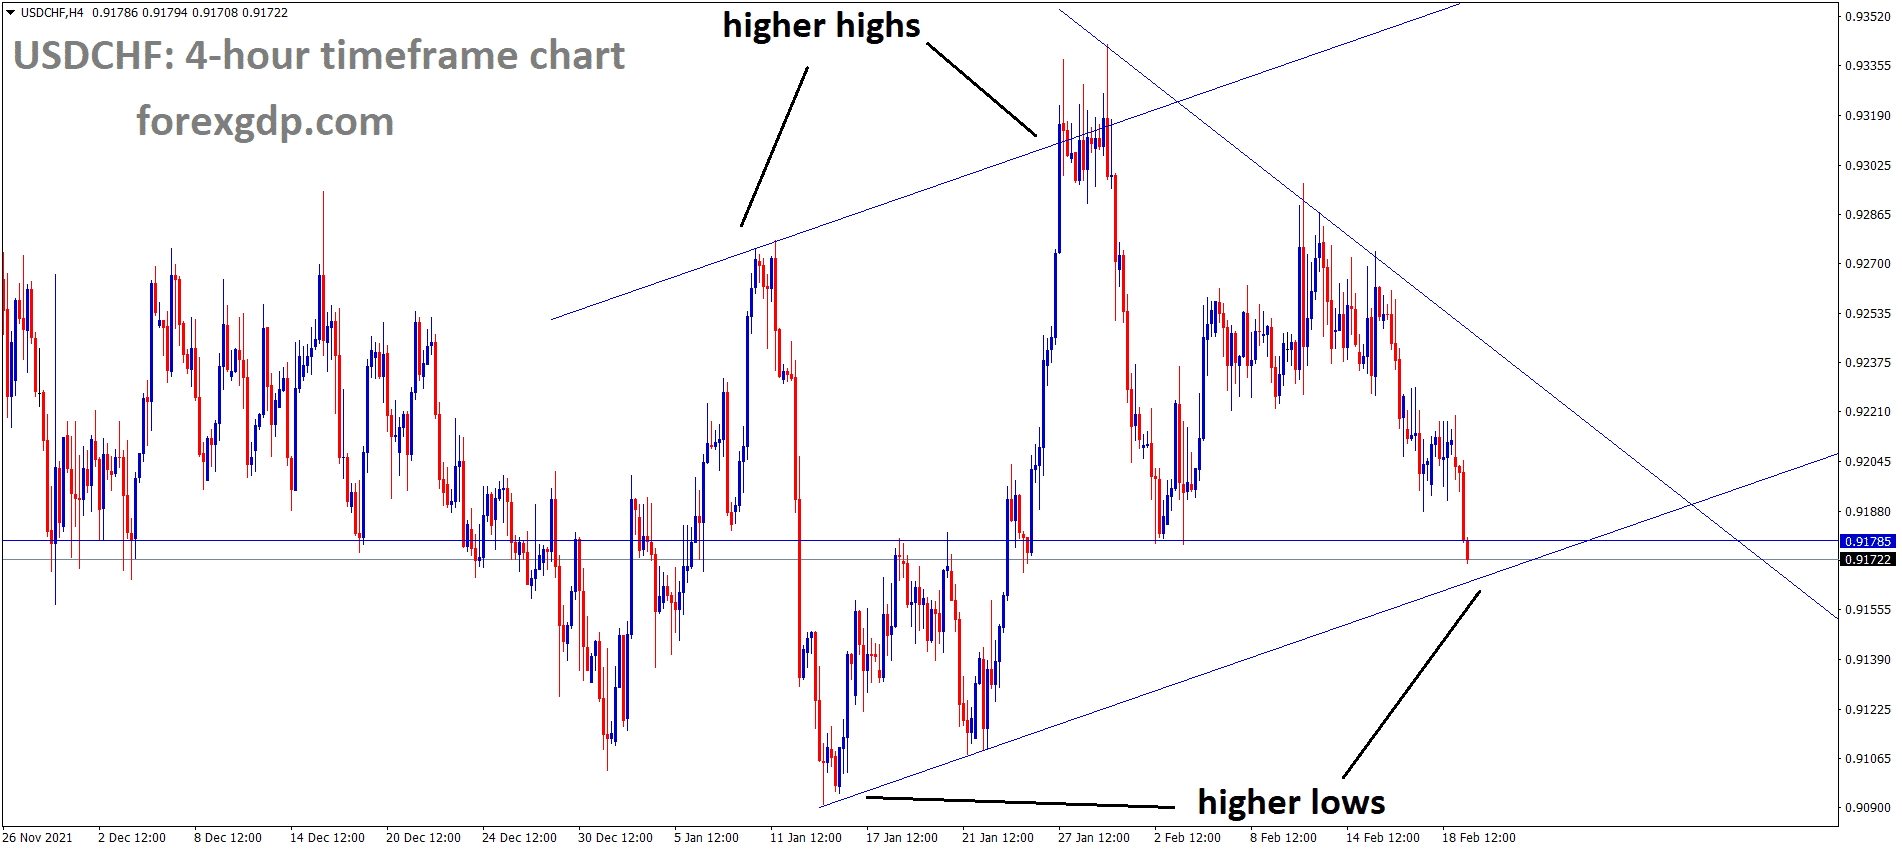 USDCHF is moving in an ascending channel and the market has reached the higher low area of the channel.